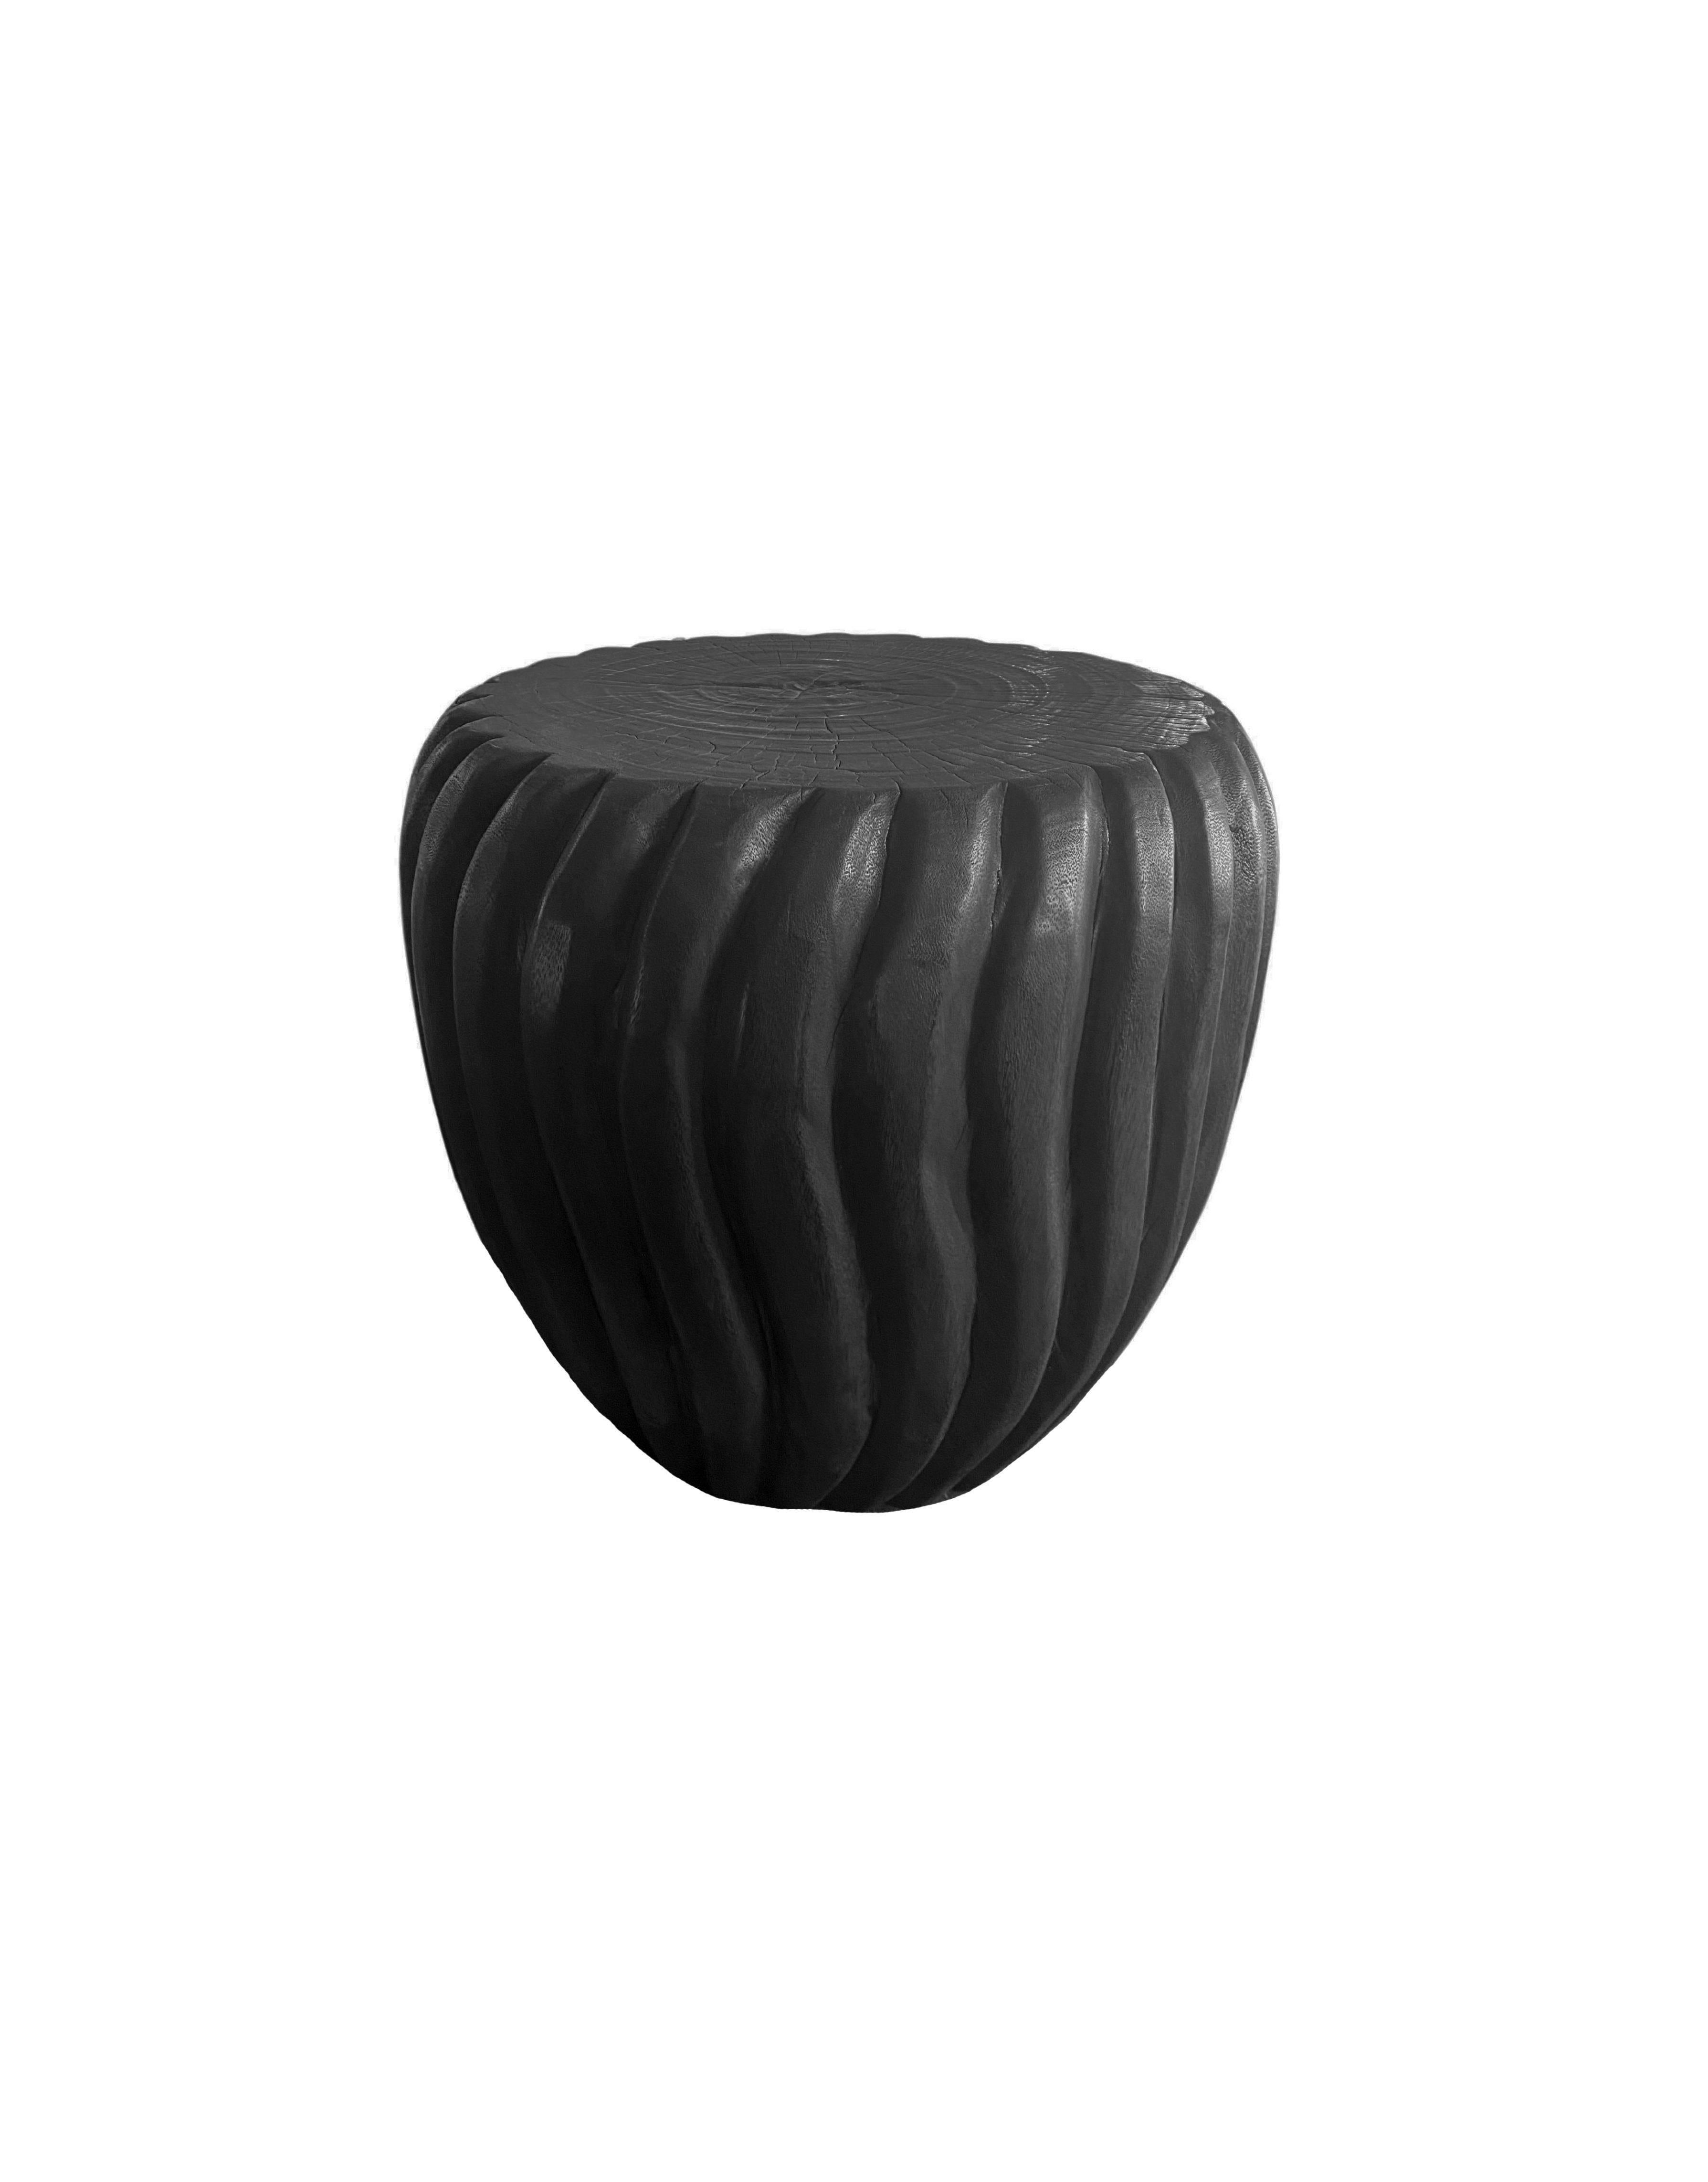 A wonderfully sculptural round side table with a hand-carved, ribbed design on its exterior. Its neutral pigment and subtle wood texture makes it perfect for any space. A uniquely sculptural and versatile piece certain to invoke conversation. This